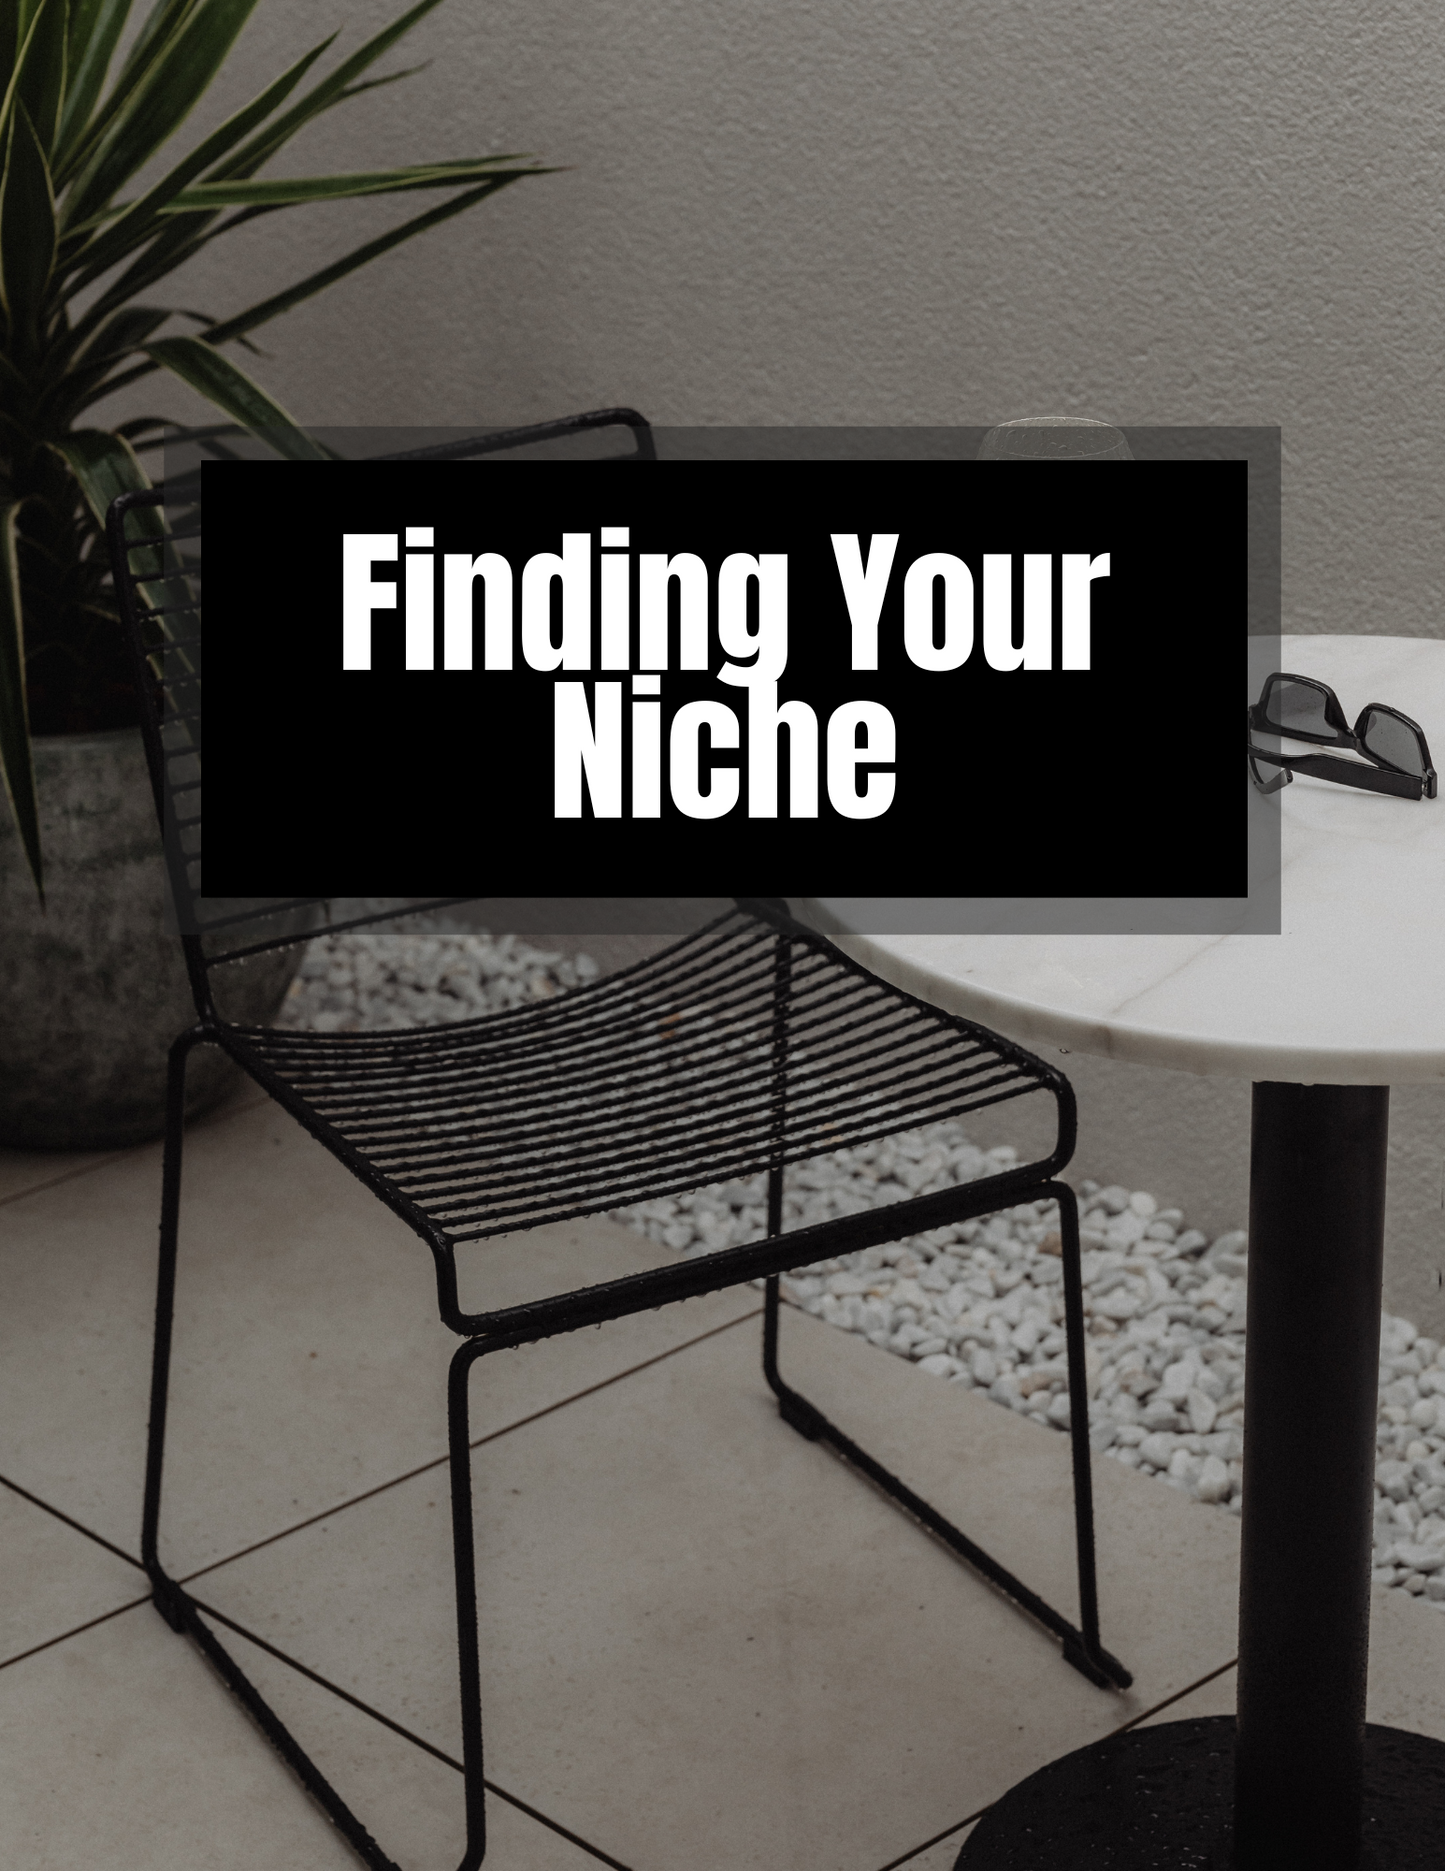 FINDING YOUR Niche - DFY